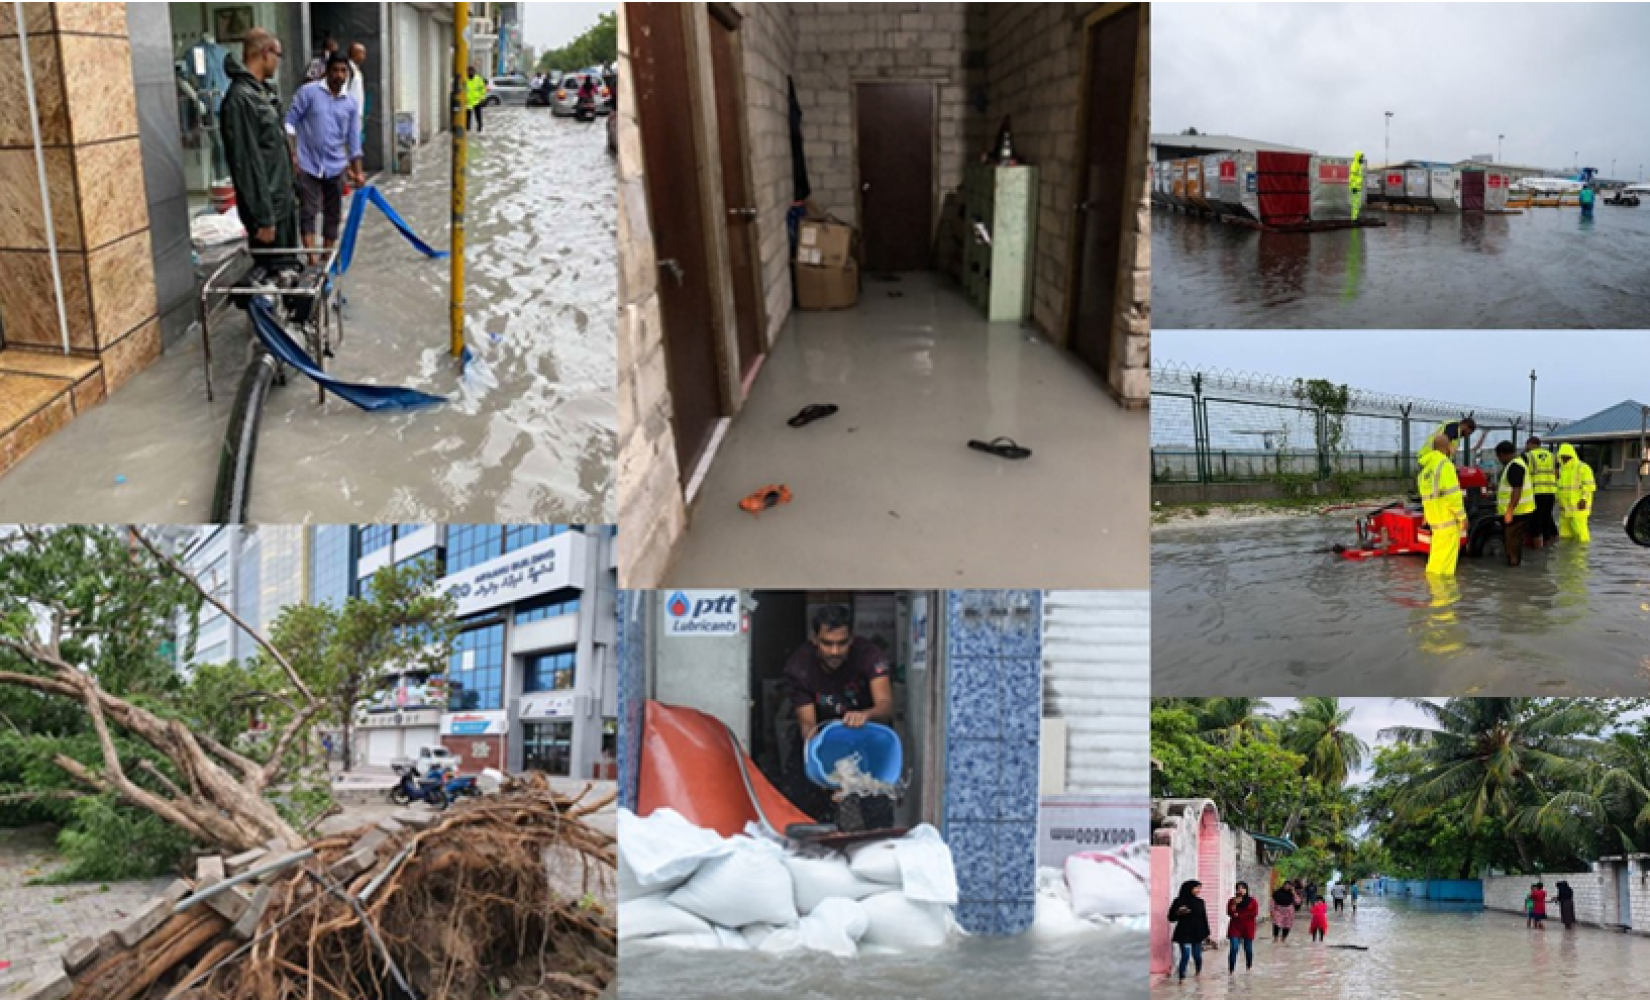 Photo: © National Disaster Management Authority (NDMA), Maldives Meteorological Service (MMS), Kinbidhoo Council, Maldives National Defence Force, Maldives Police Service, The Edition, Raajjemv (pictures)